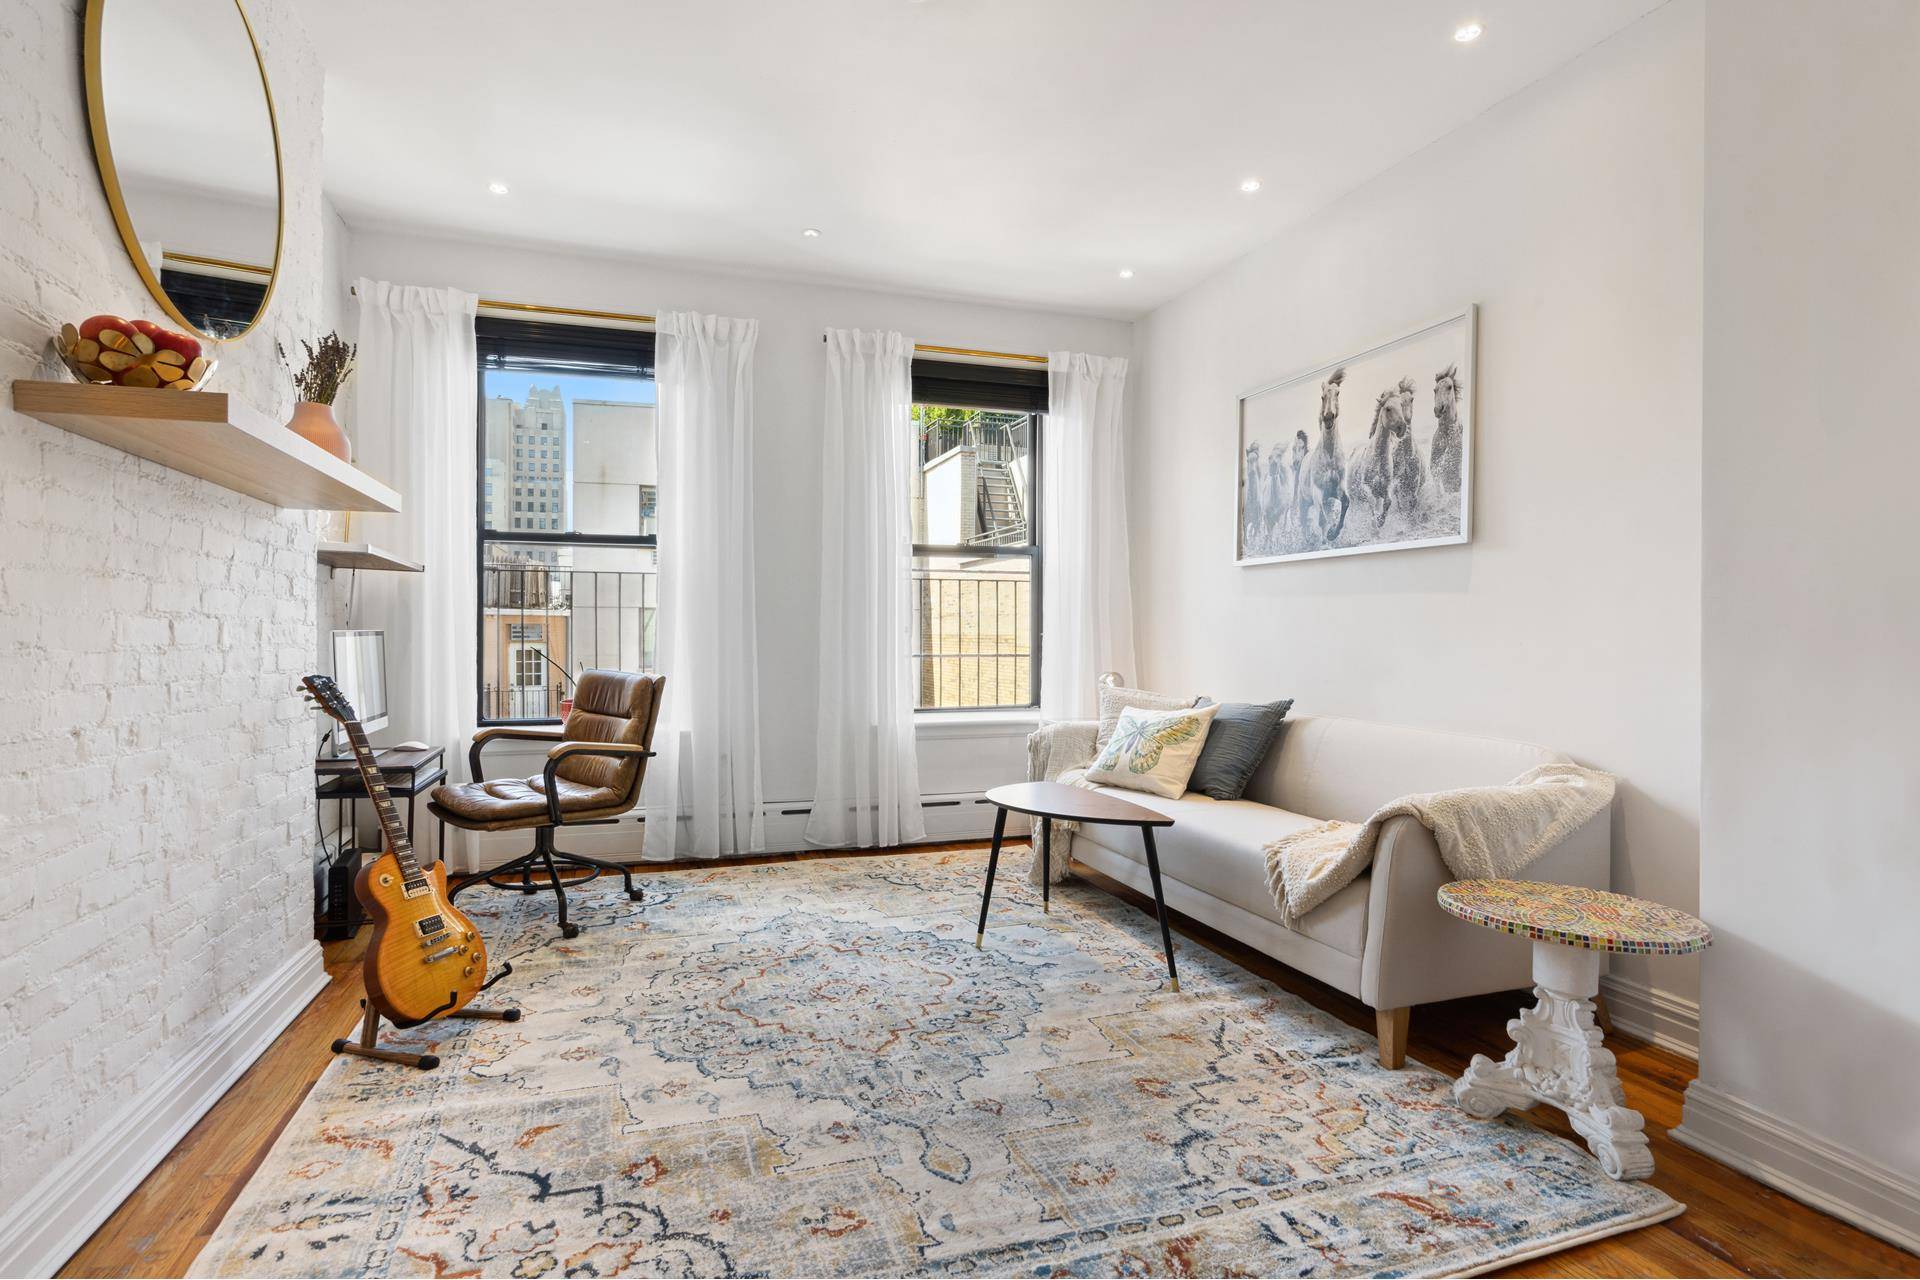 Sun filled jewel box ! Located in the heart of Hell's Kitchen on a beautiful, tree lined block.